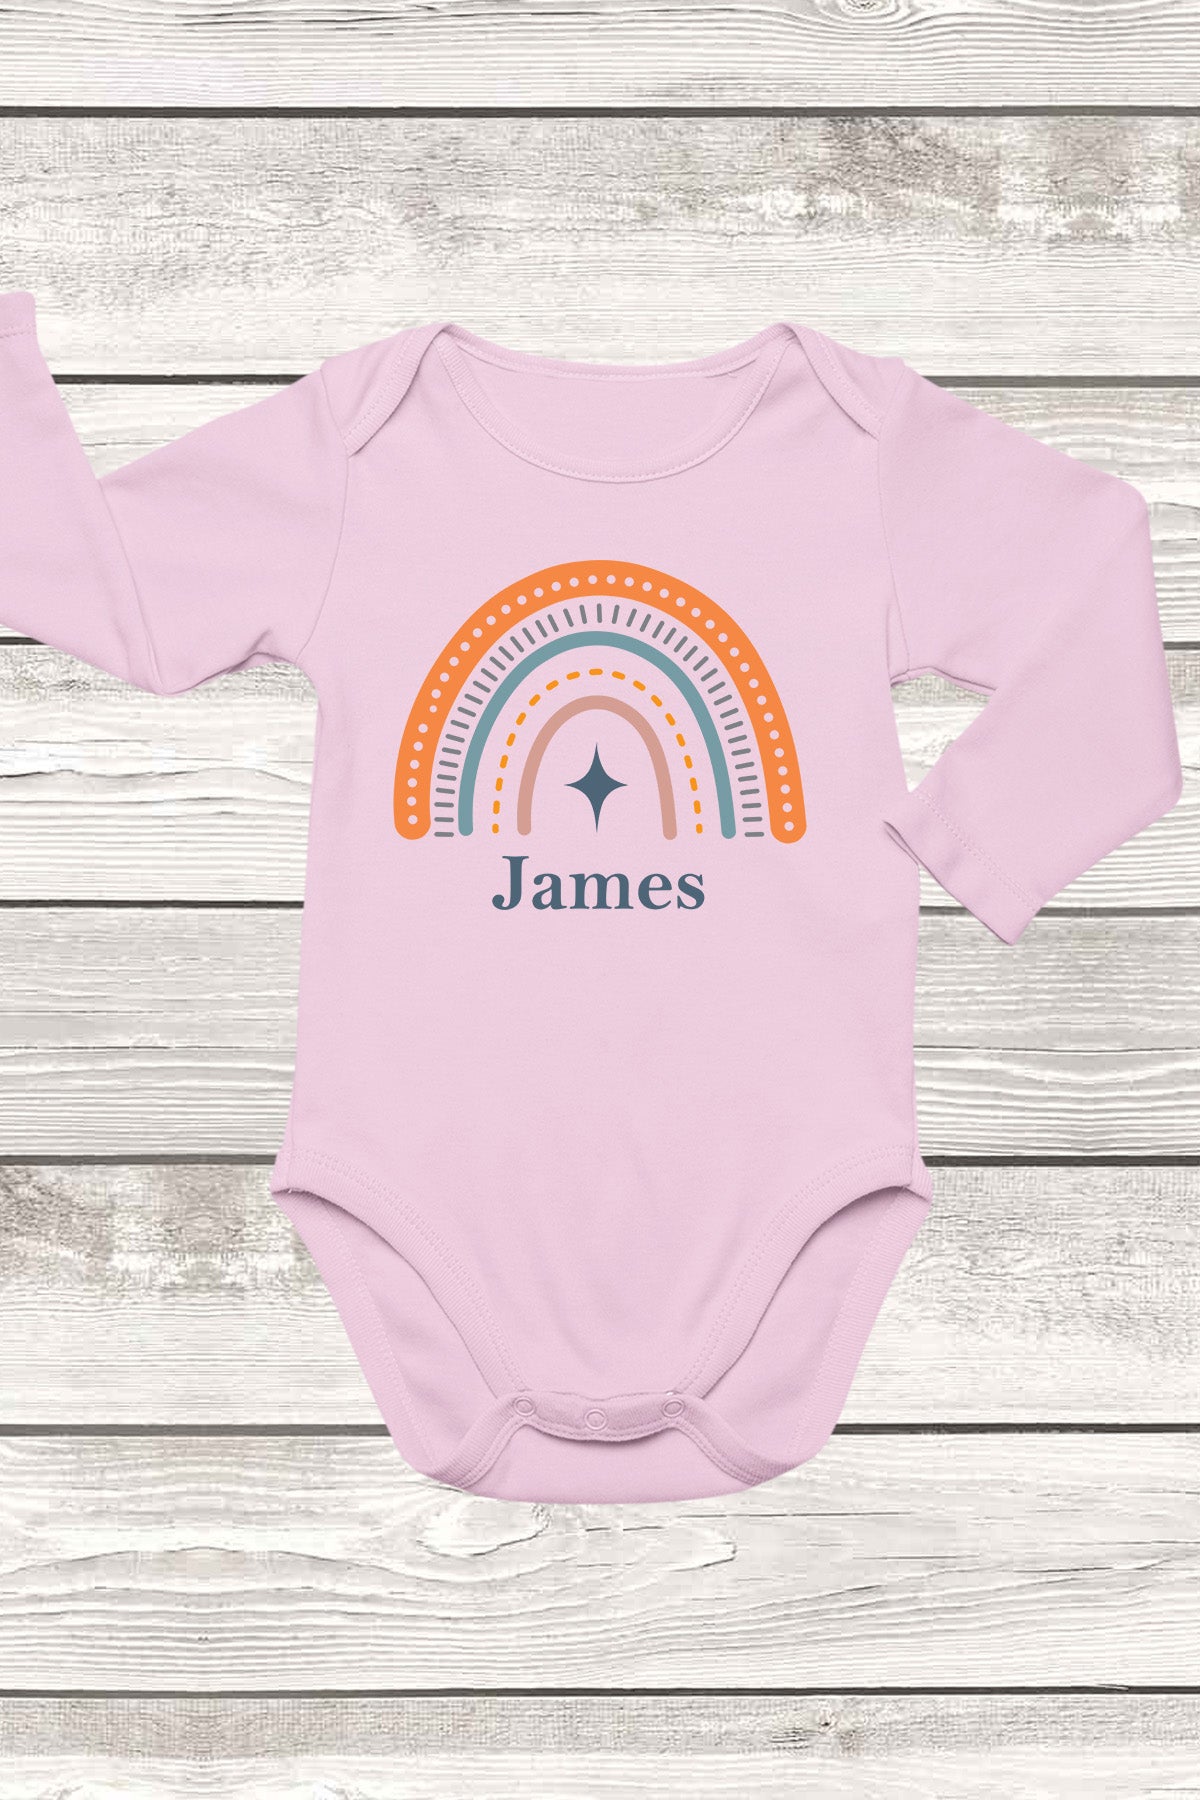 Personalized Baby Name With Rainbow Bodysuit